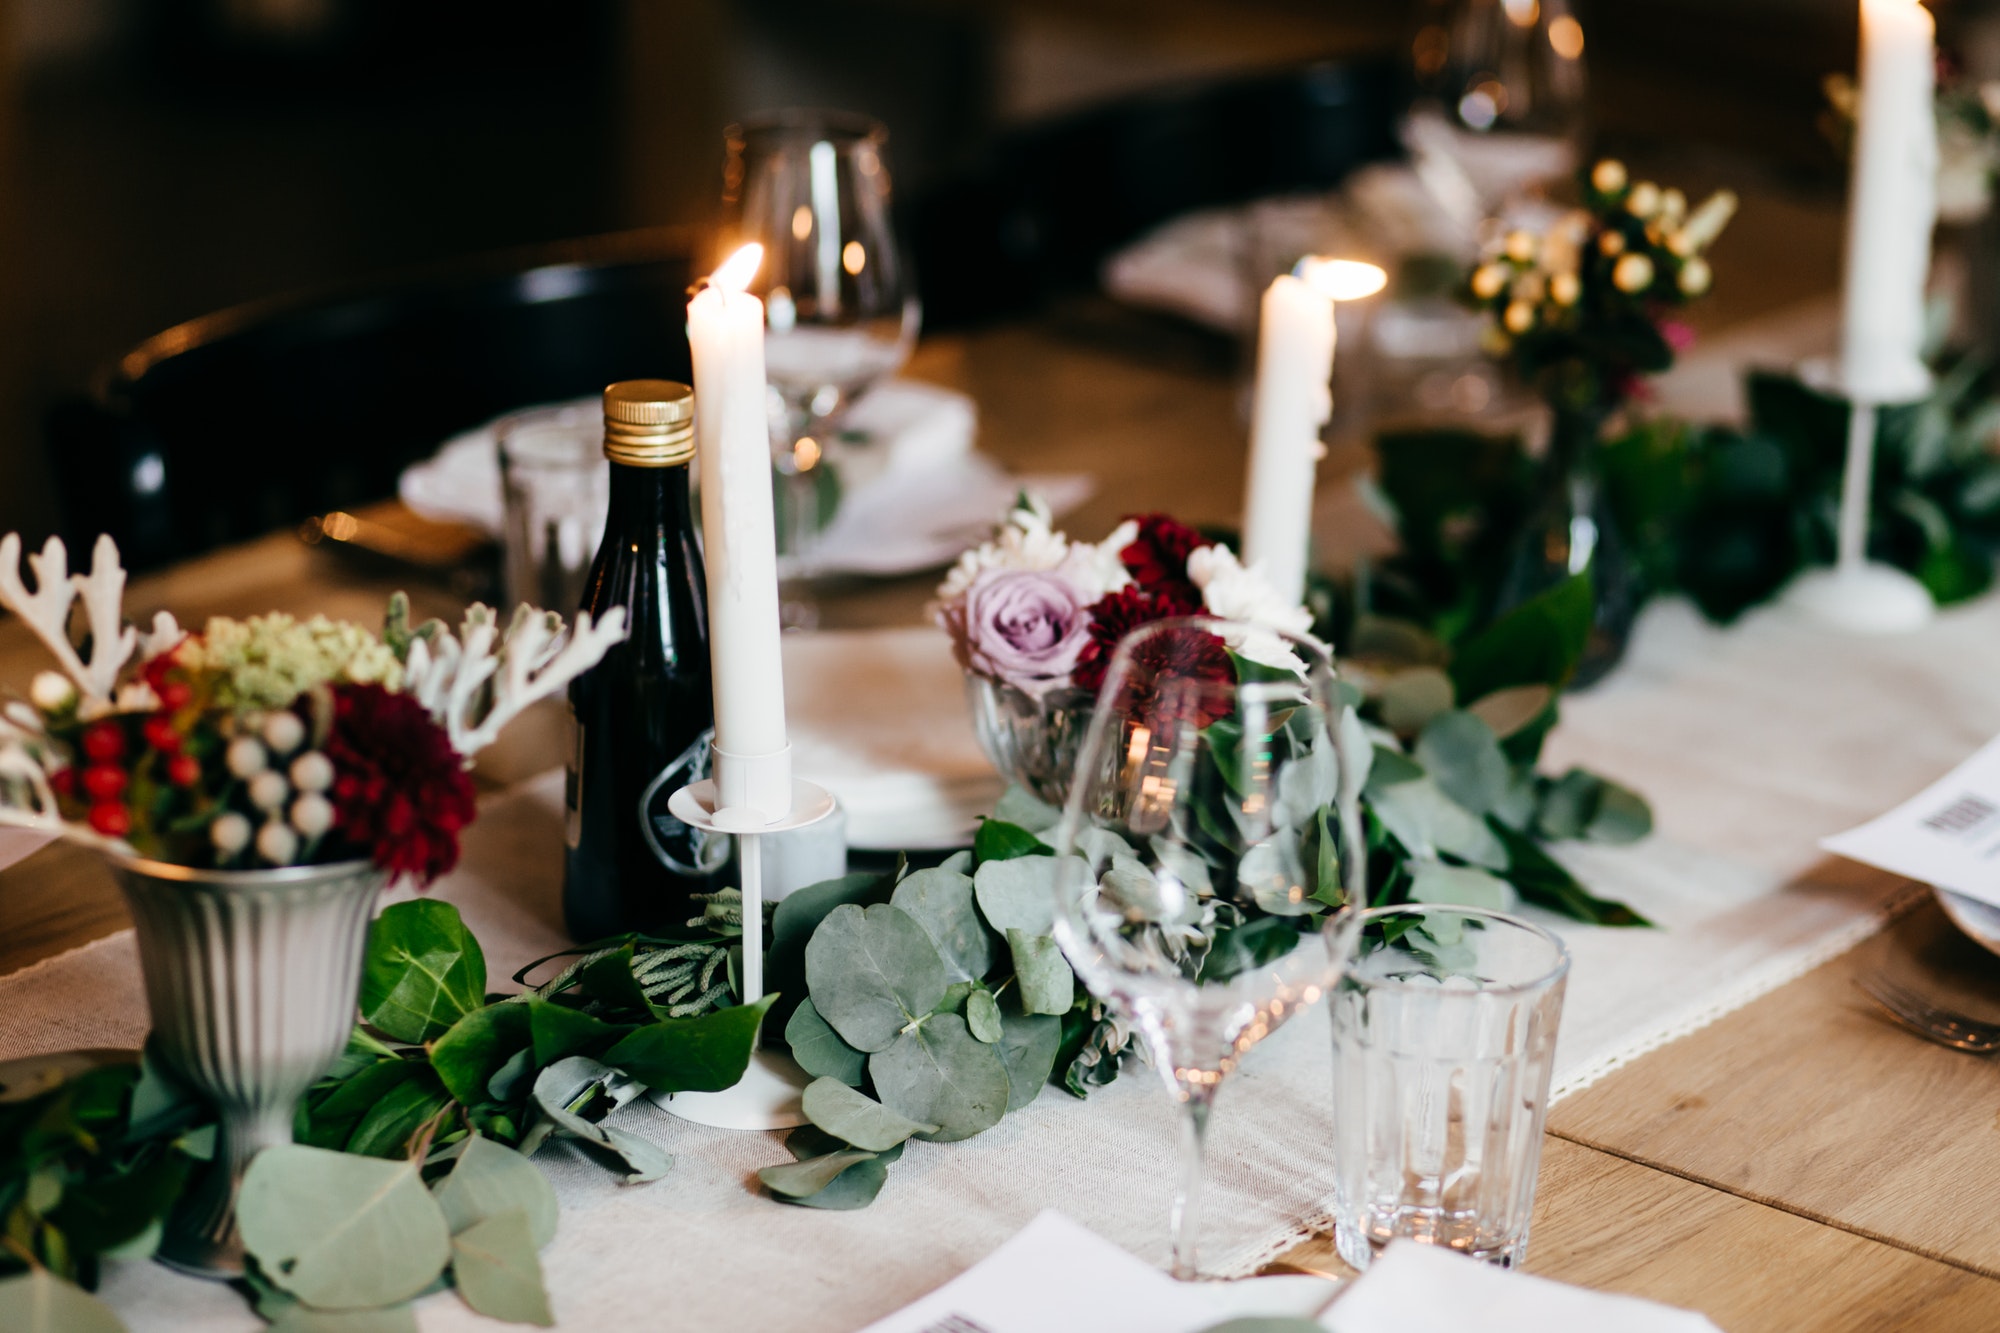 Wedding table decorated with flowers and candles. Table setting, selective focus